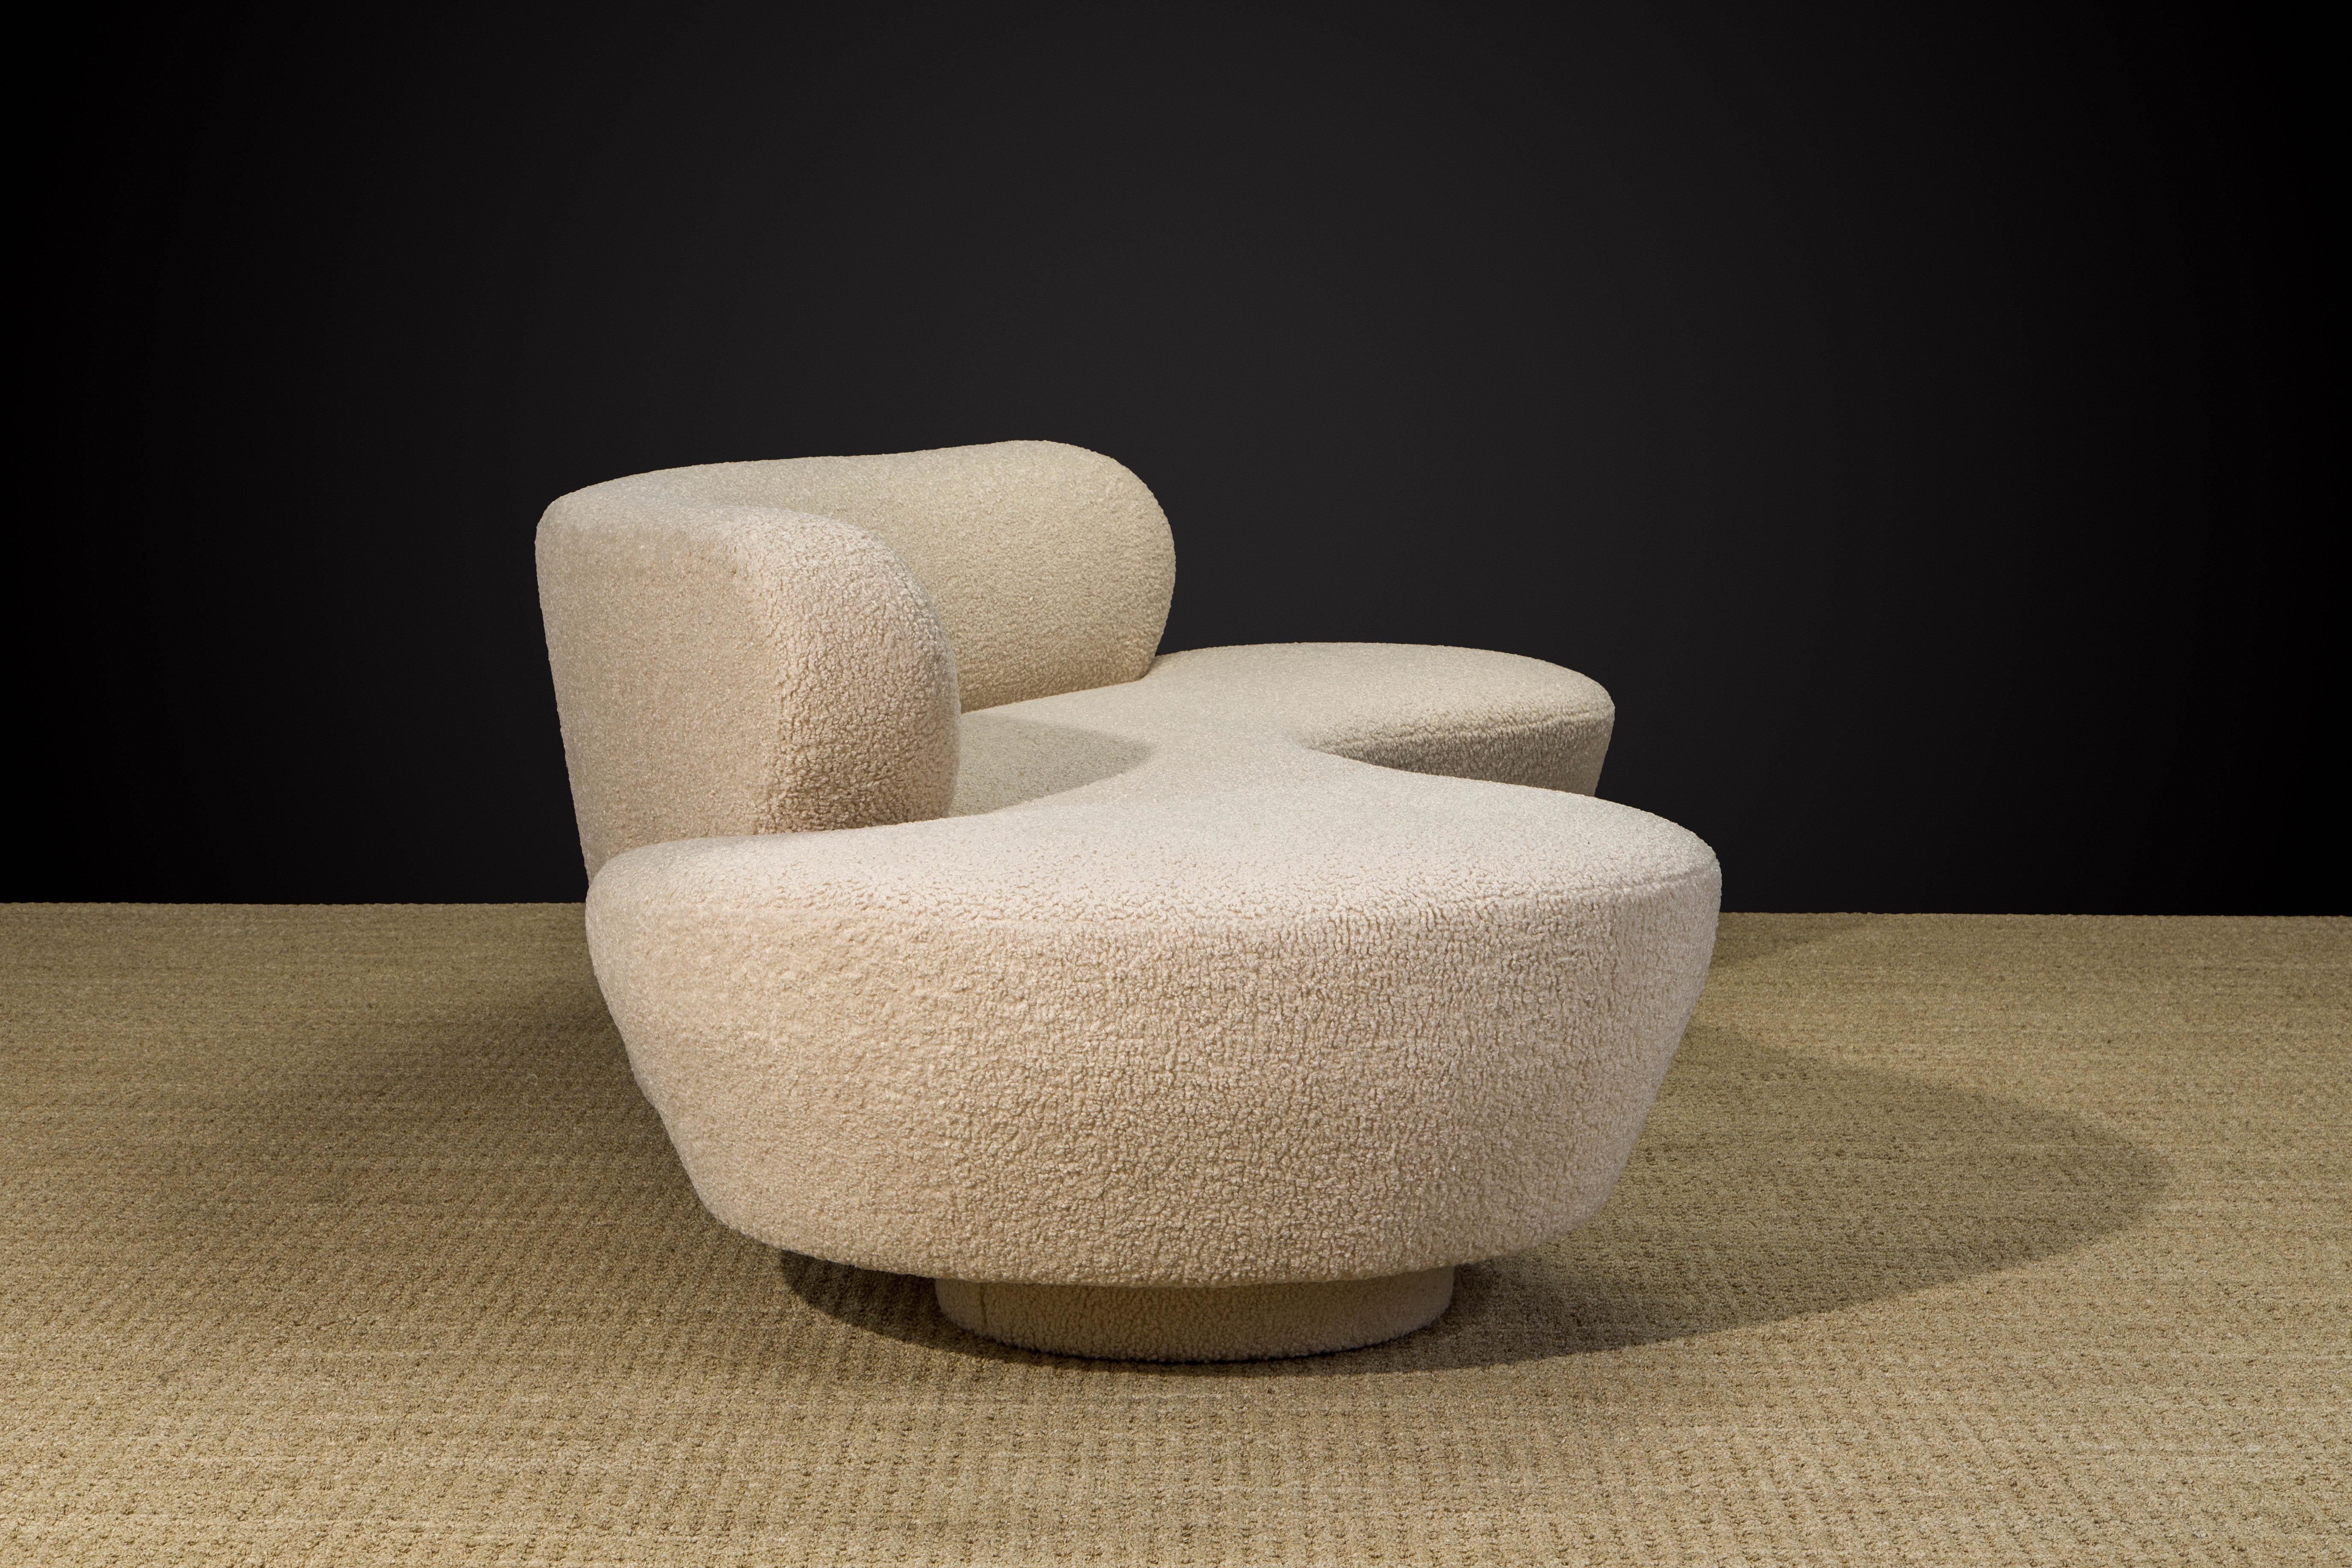 Late 20th Century Vladimir Kagan for Directional 'Cloud' Sofas in New Nubby Bouclé, c 1980, Signed